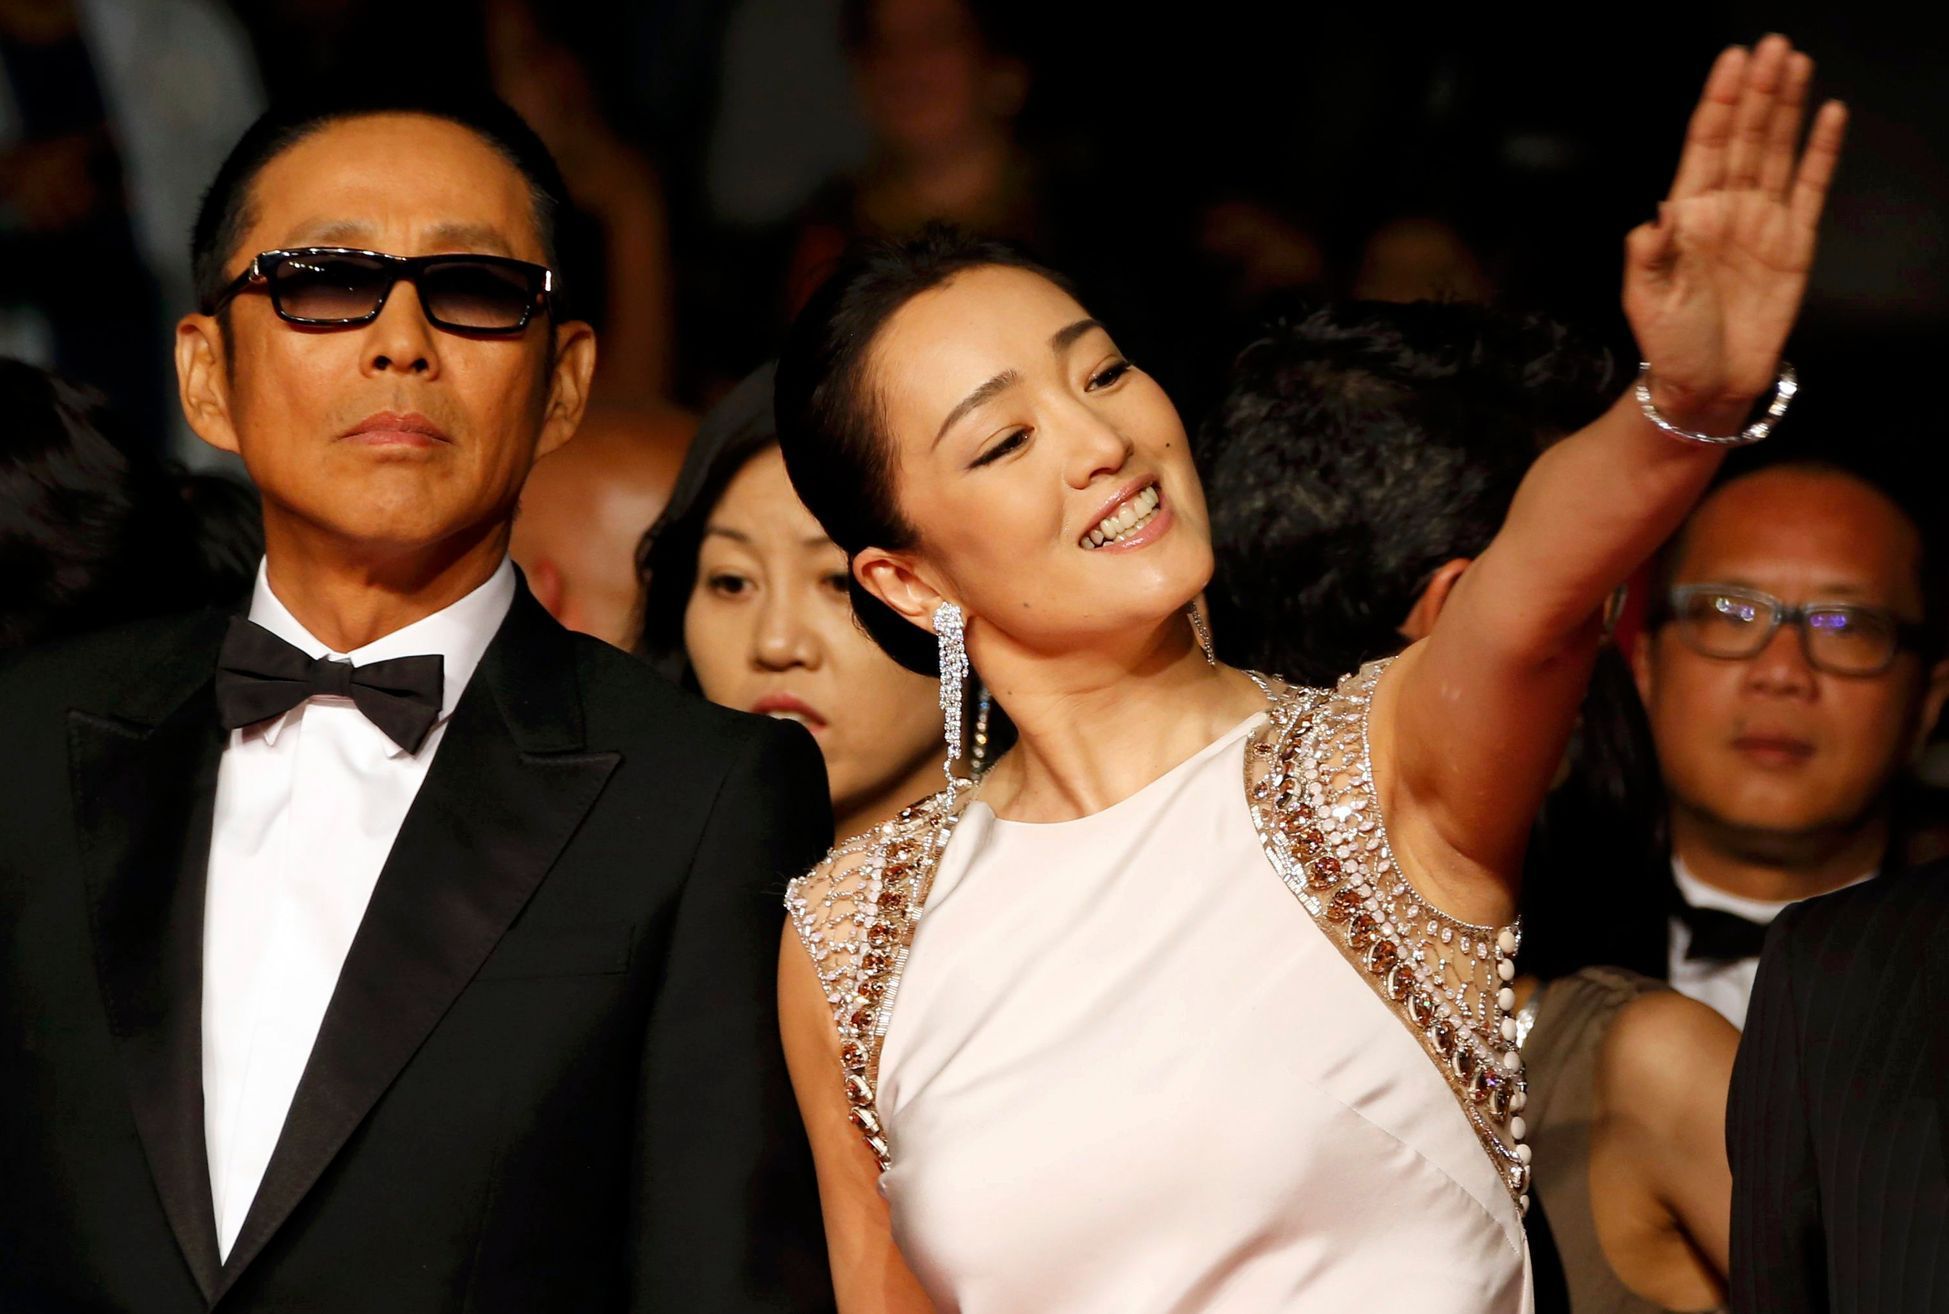 Cast members Gong Li and Chen Daoming pose on the red carpet as they arrive for the screening of the film &quot;Coming Home&quot; out of competition at the 67th Cannes Film Festival in Cannes